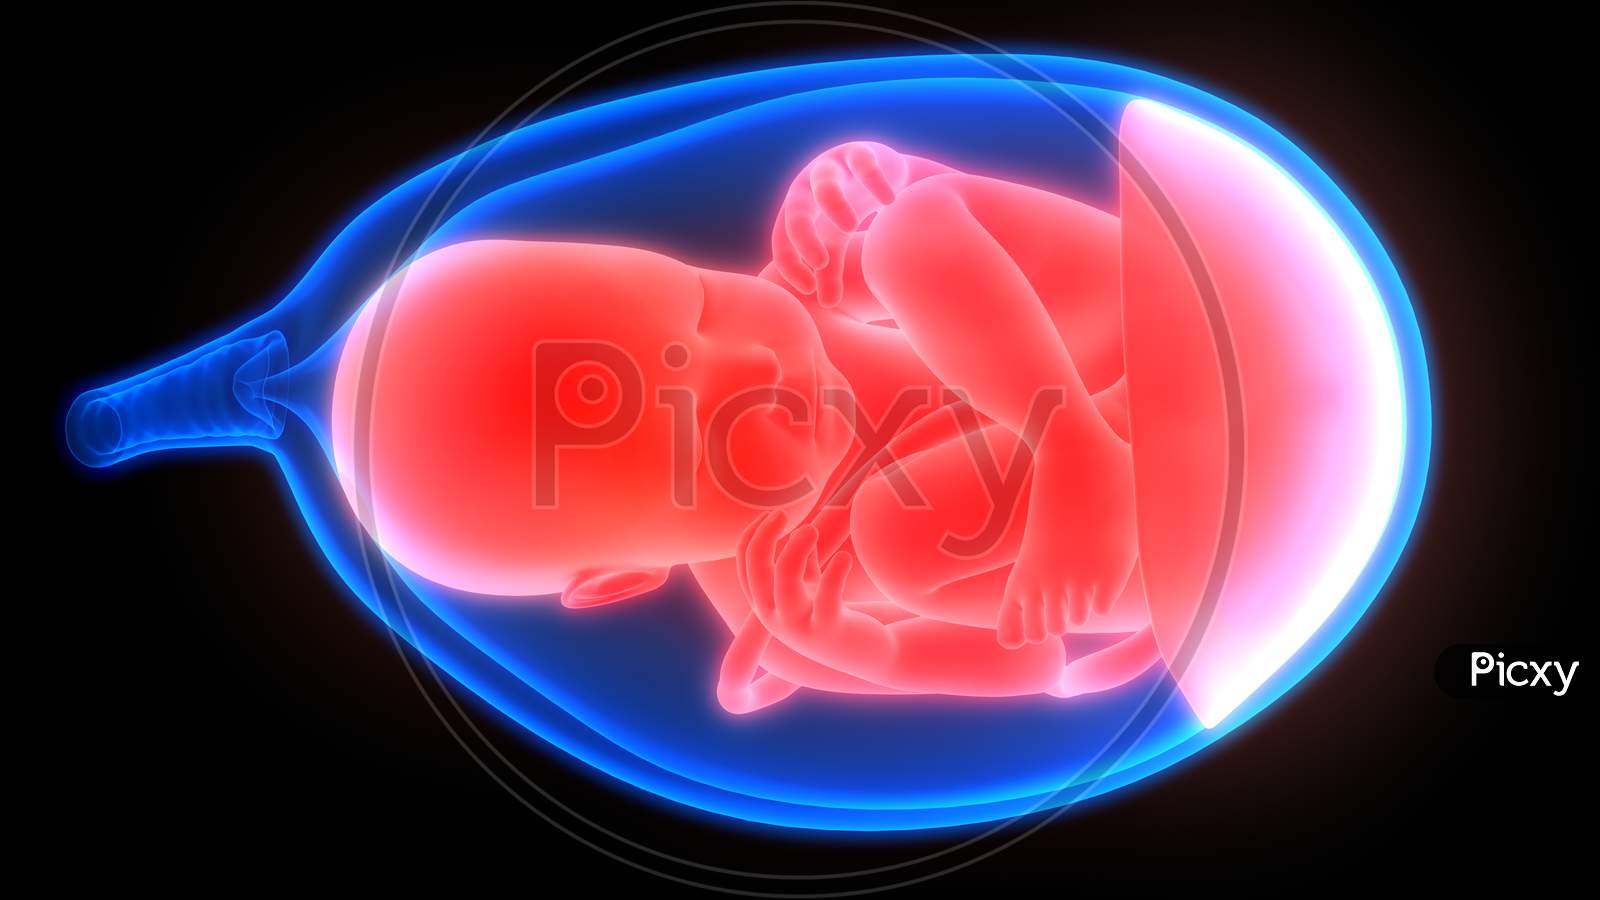 Fetus (Baby) in Womb Anatomy